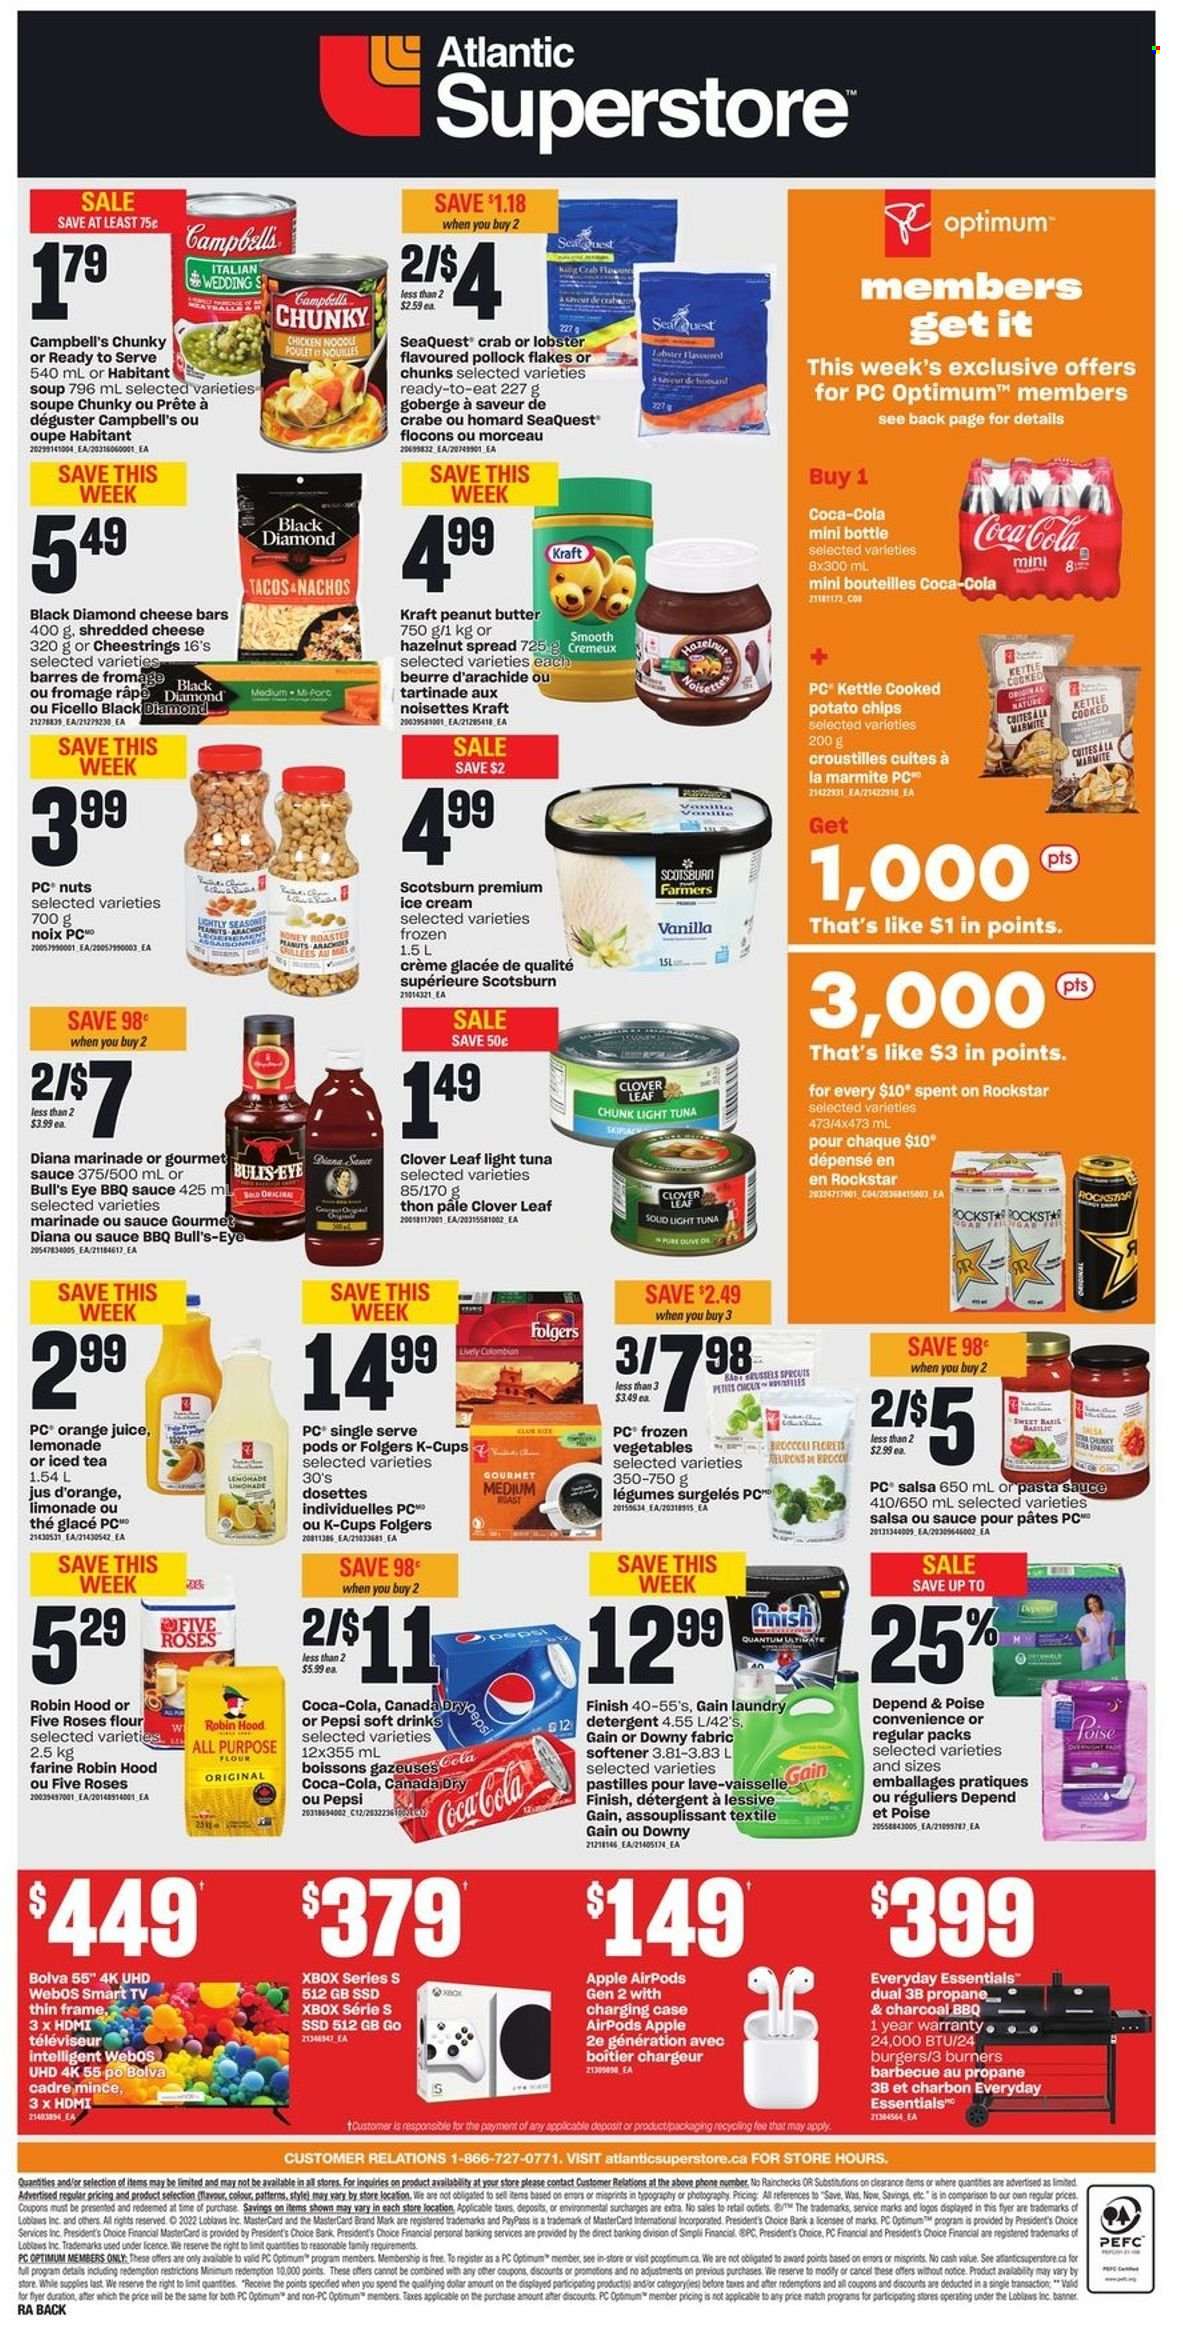 thumbnail - Atlantic Superstore Flyer - May 12, 2022 - May 18, 2022 - Sales products - tacos, lobster, tuna, pollock, crab, Campbell's, pasta sauce, soup, hamburger, sauce, Kraft®, shredded cheese, string cheese, Président, Clover, ice cream, pastilles, potato chips, light tuna, BBQ sauce, salsa, marinade, peanut butter, hazelnut spread, Canada Dry, Coca-Cola, lemonade, Pepsi, orange juice, juice, ice tea, soft drink, Folgers, coffee capsules, K-Cups, Gain, fabric softener, Downy Laundry, Optimum, detergent. Page 2.